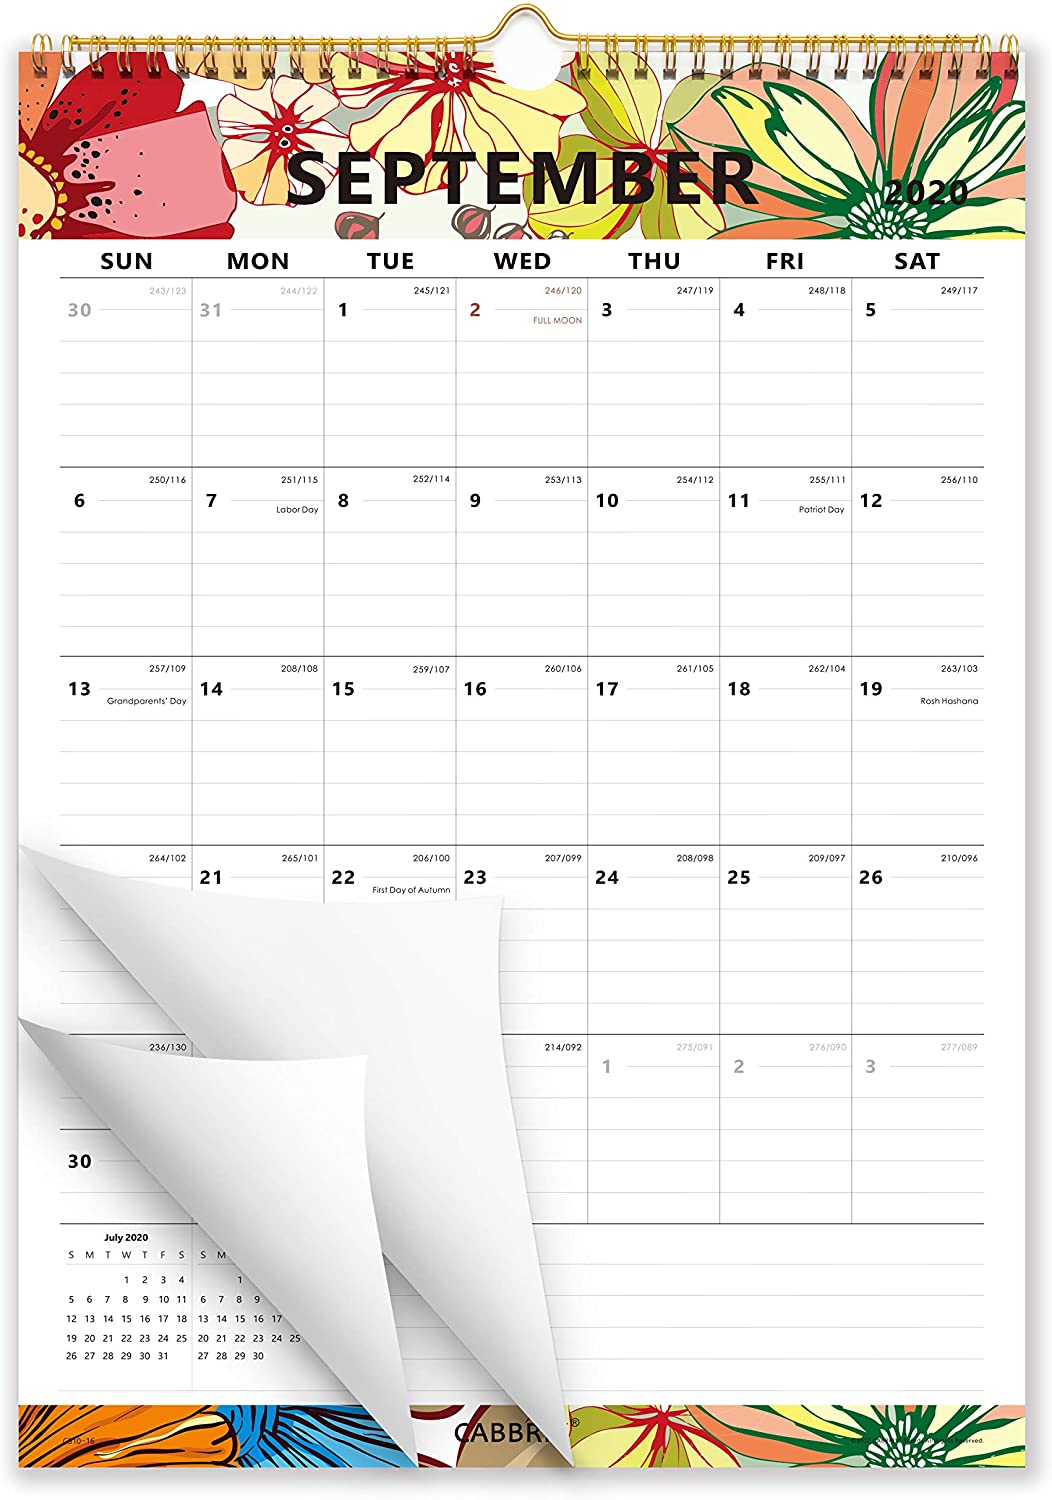 12 x 17 Wirebound Thick Paper Perfect for Organizing /& Planning Ruled Block 2019 Wall Calendar Calendar Planner 2019